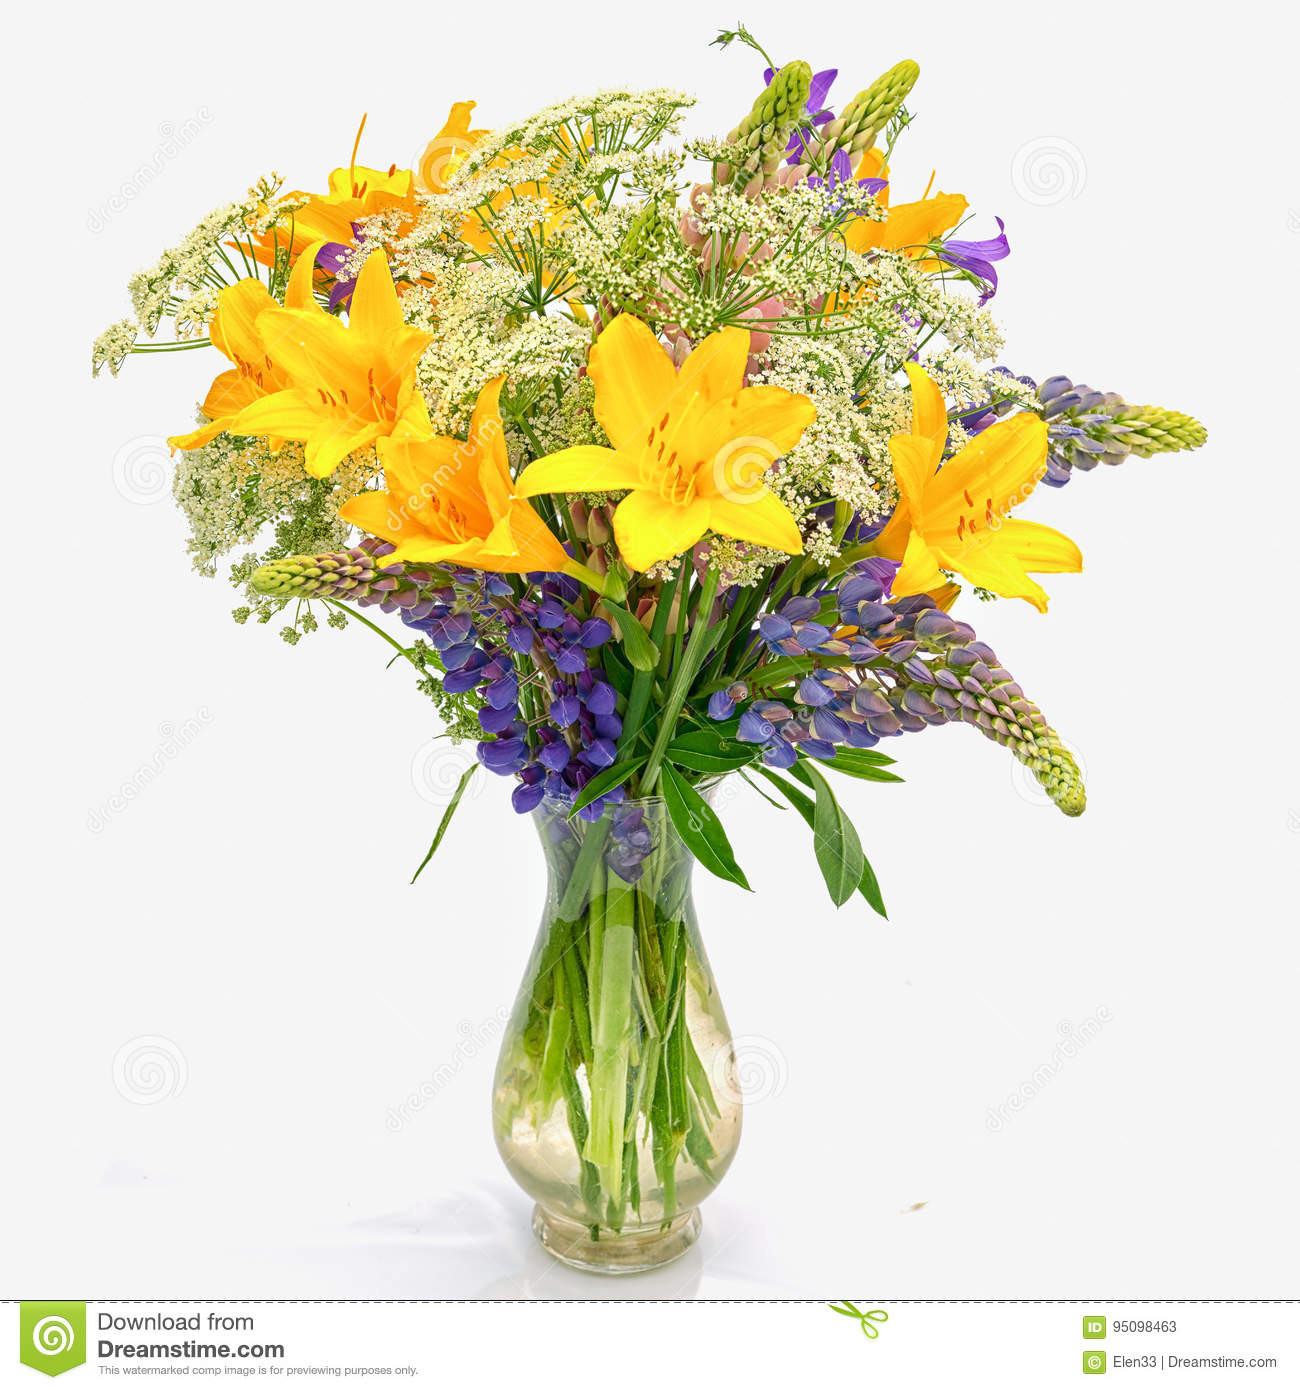 11 Unique Cheap Glass Flower Vases 2024 free download cheap glass flower vases of bouquet stock image image of bouquet beauty lily blossom 95098463 inside bouquet od wild flowers achillea millefolium day lily and lupine in a transparent glass v